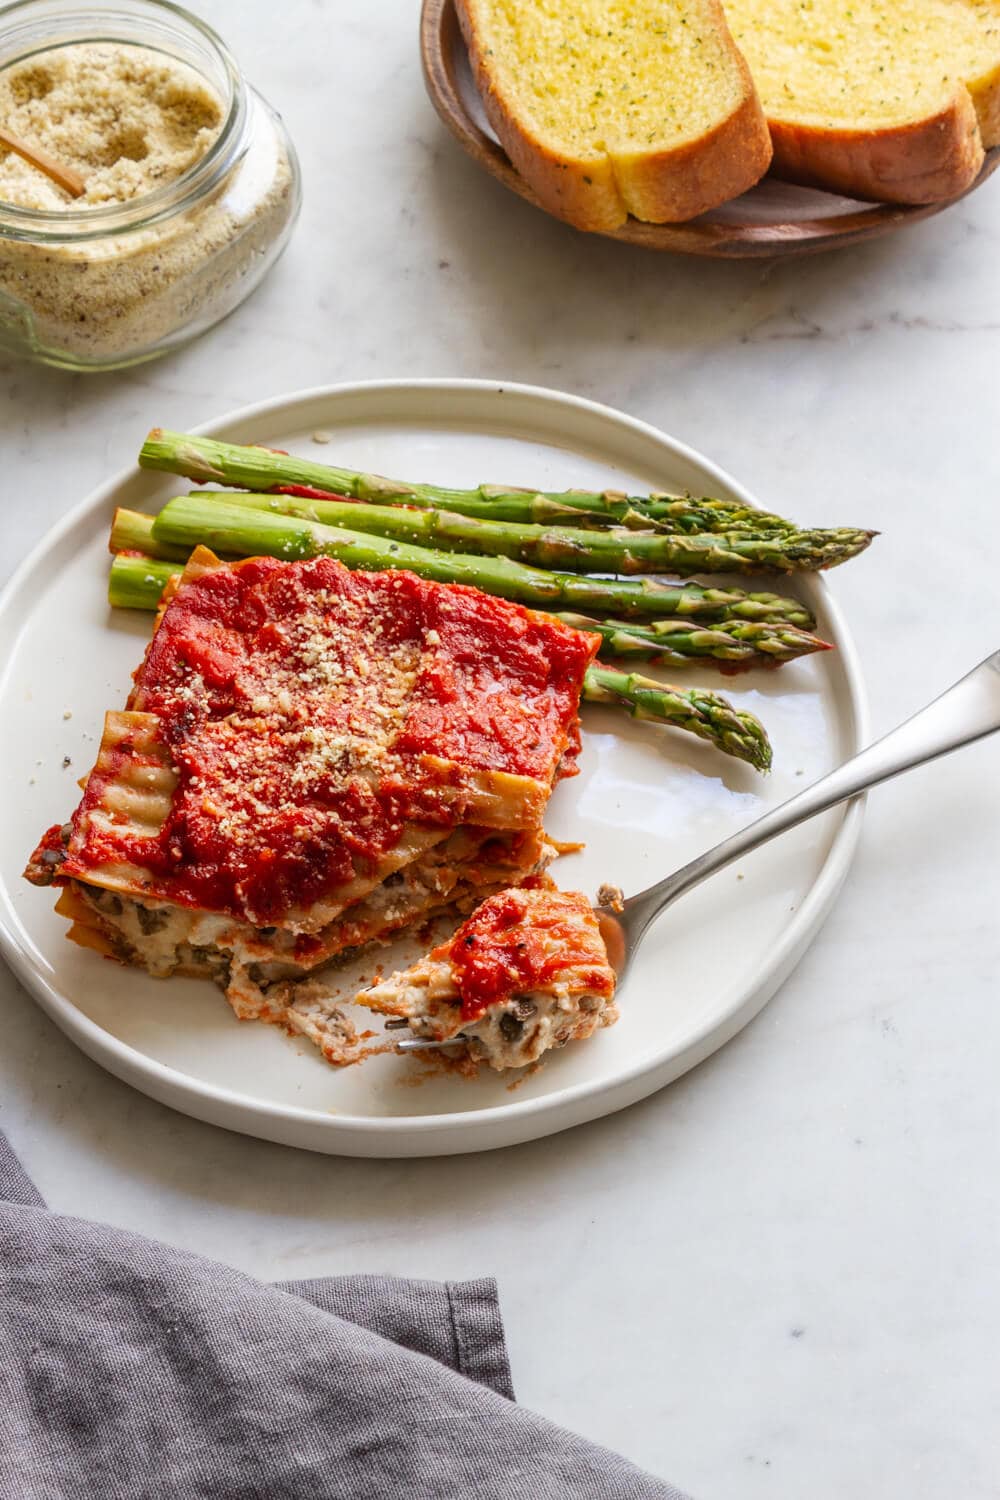 side view of a plate with a slice of simple vegan lasagna and asparagus, with almond parmesan and bread on the side